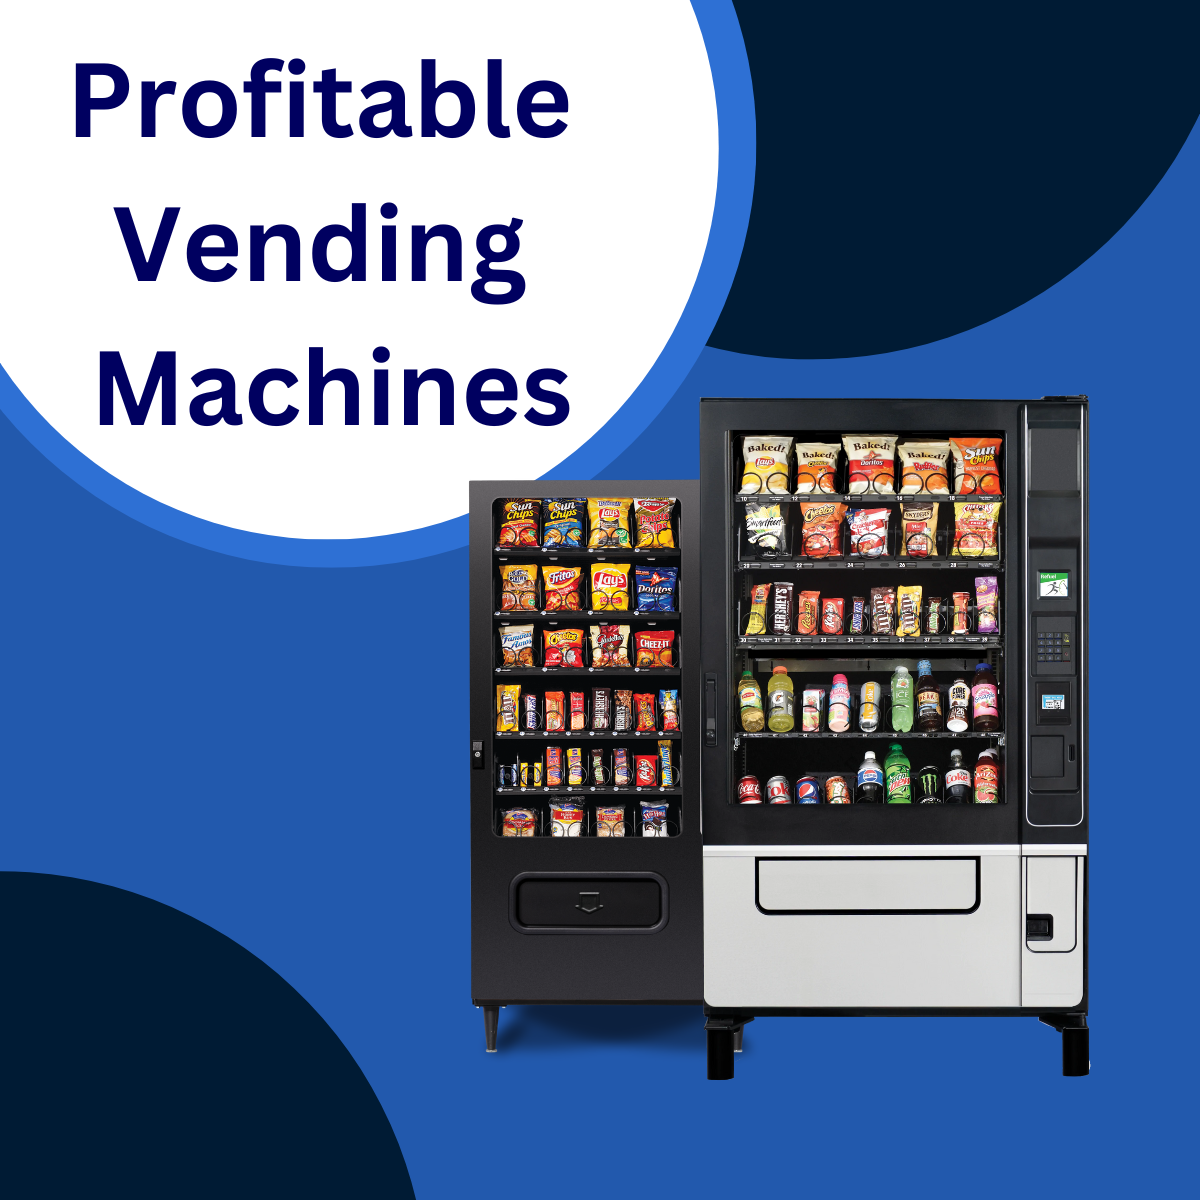 VENDING MACHINES CAN BE A GREAT WAY TO MAKE MONEY